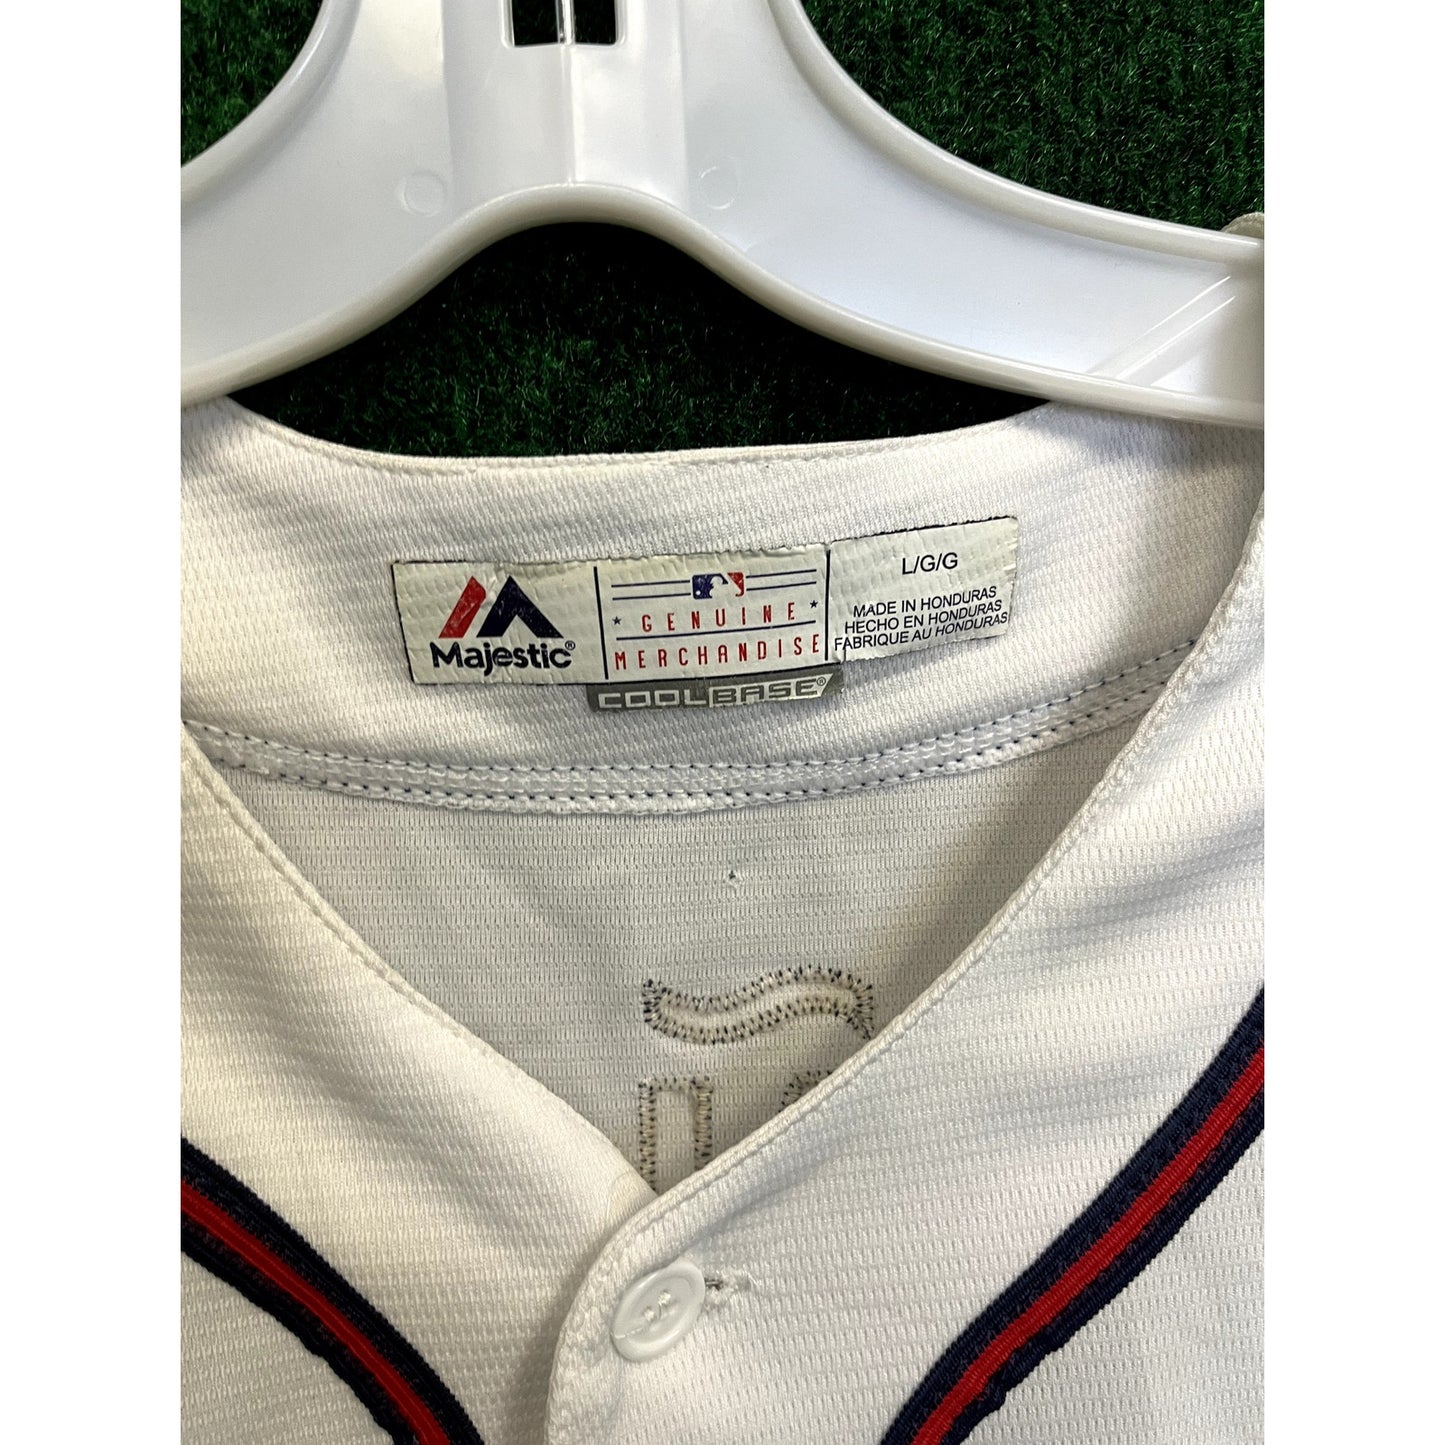 MLB Atlanta Braves Ronald Acuna Button Up White Home Jersey Sz Large